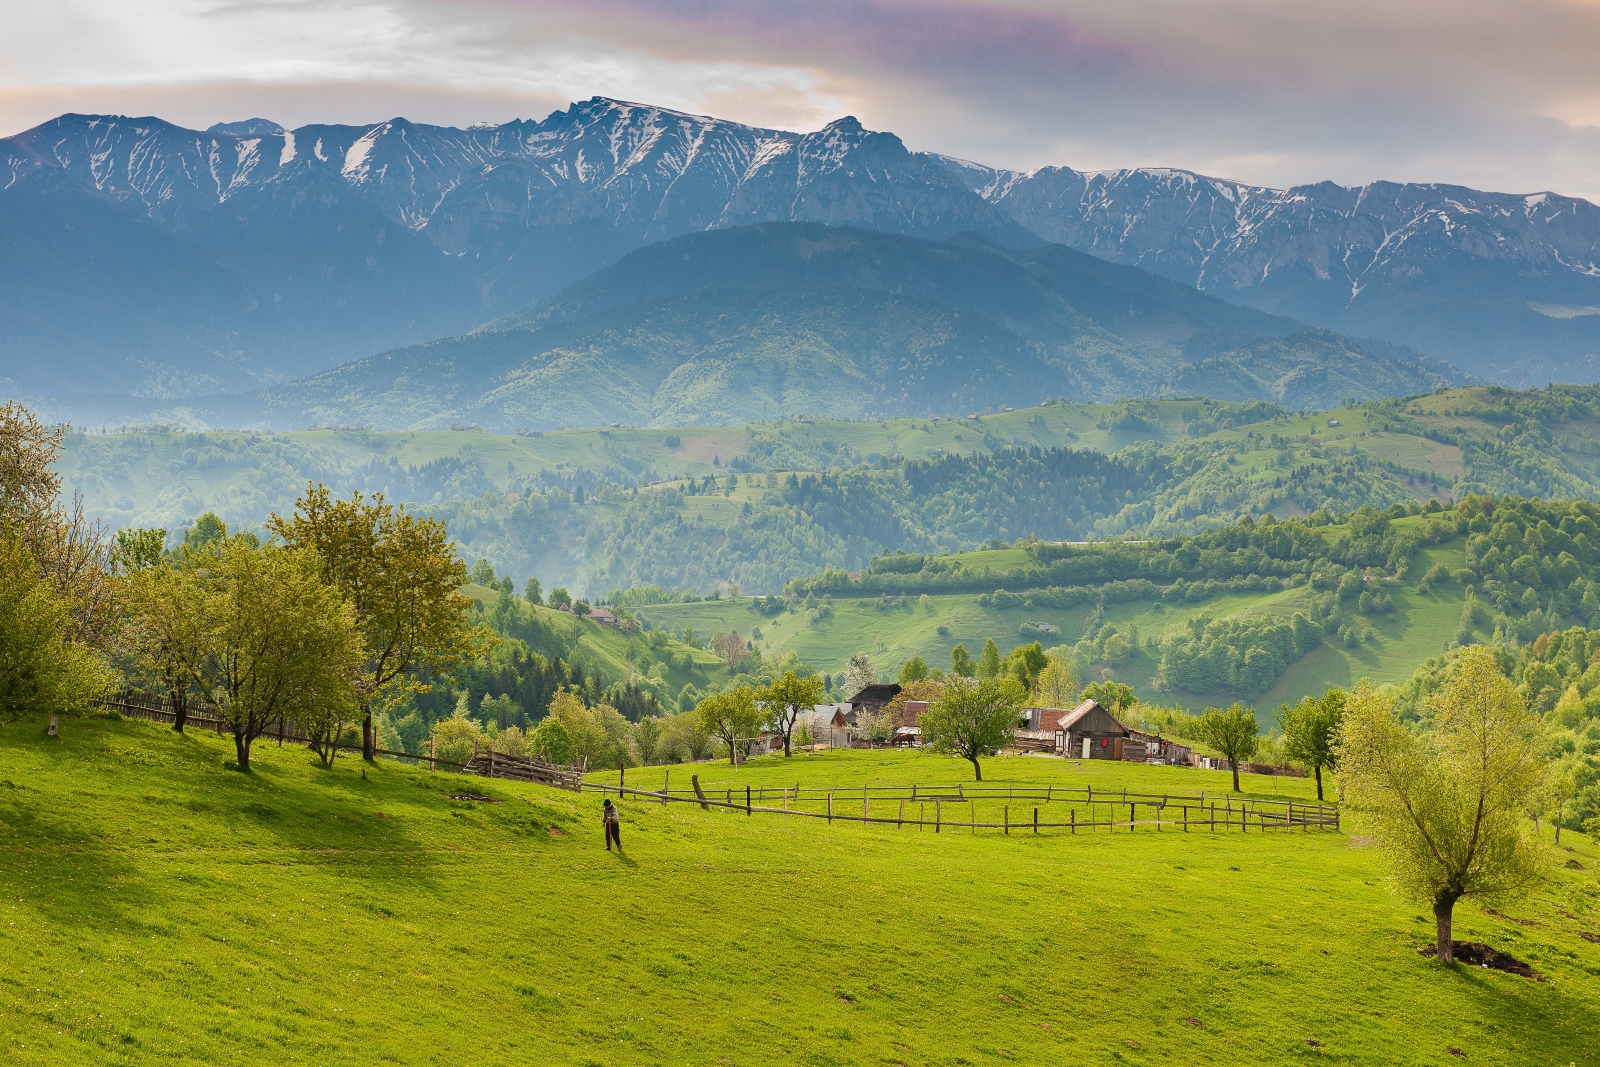 Traditional countryside in Maramures in Romania